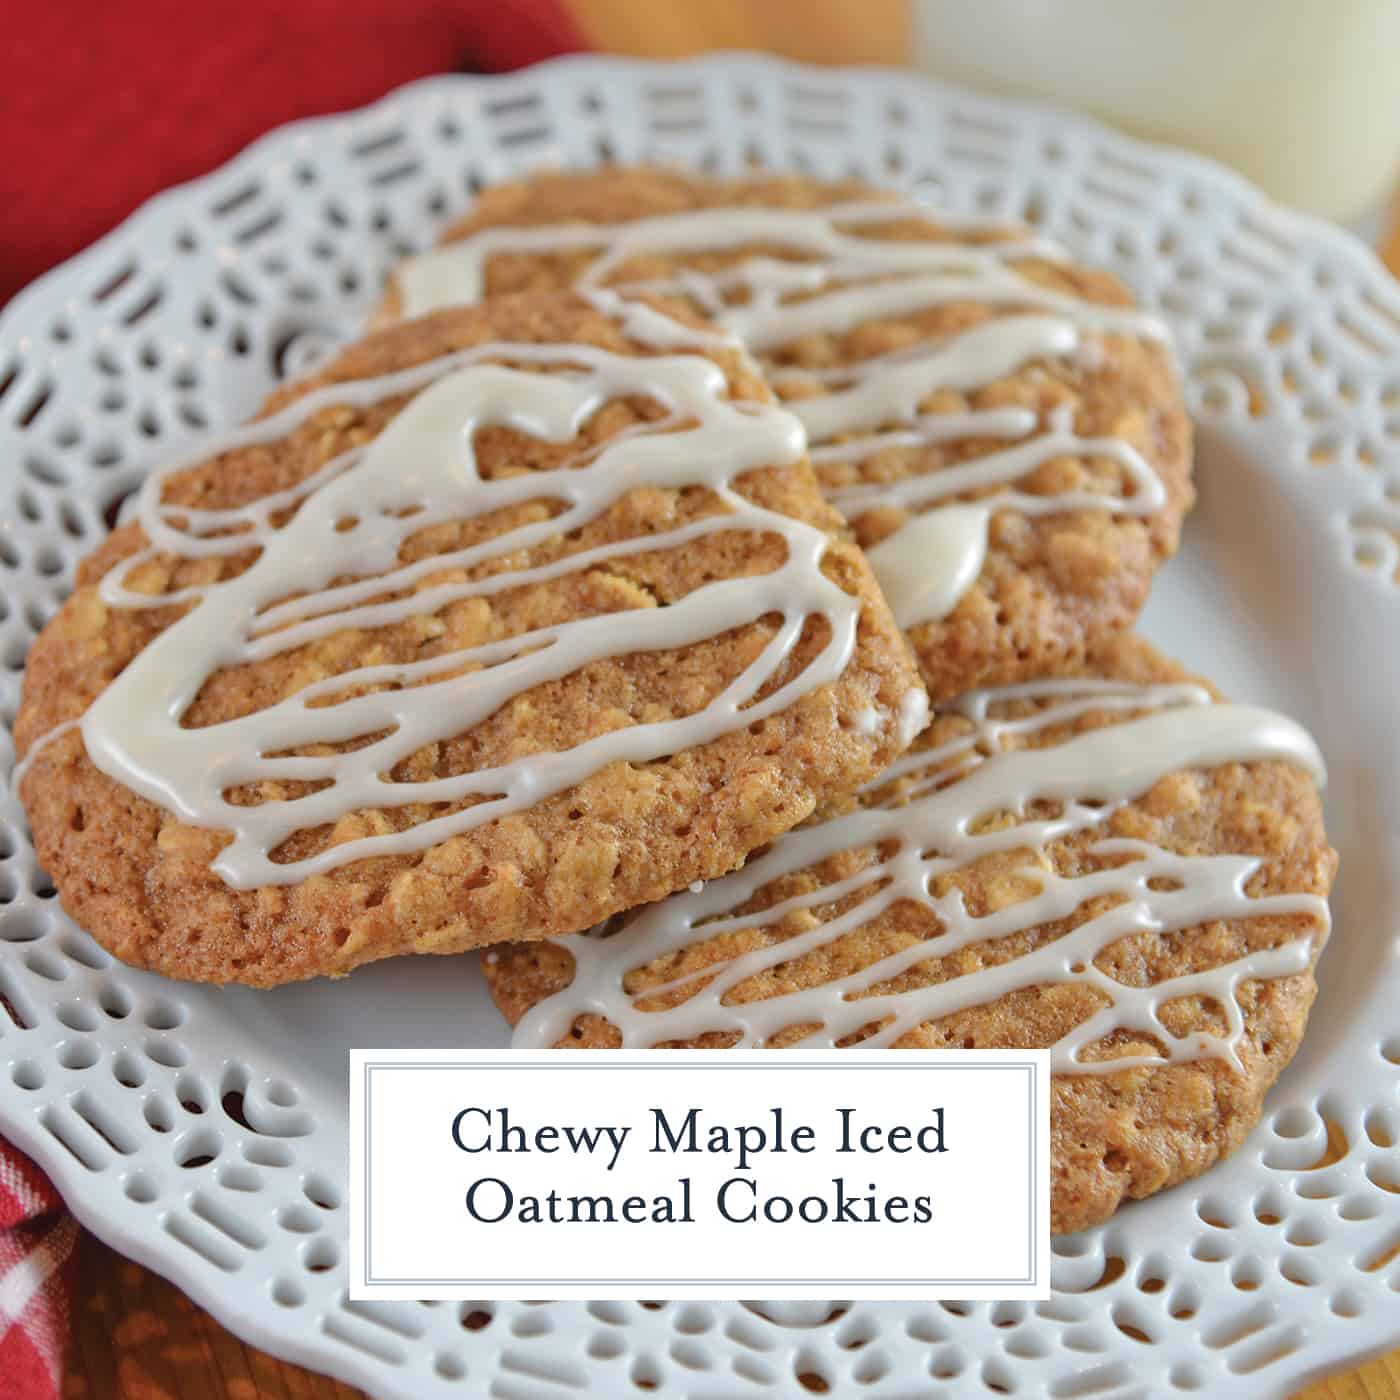 Maple Iced Oatmeal Cookies take your traditional oatmeal cookies and turn them up a notch by adding a delicious maple glaze! #chewyoatmealcookies #softoatmealcookies www.savoryexperiments.com